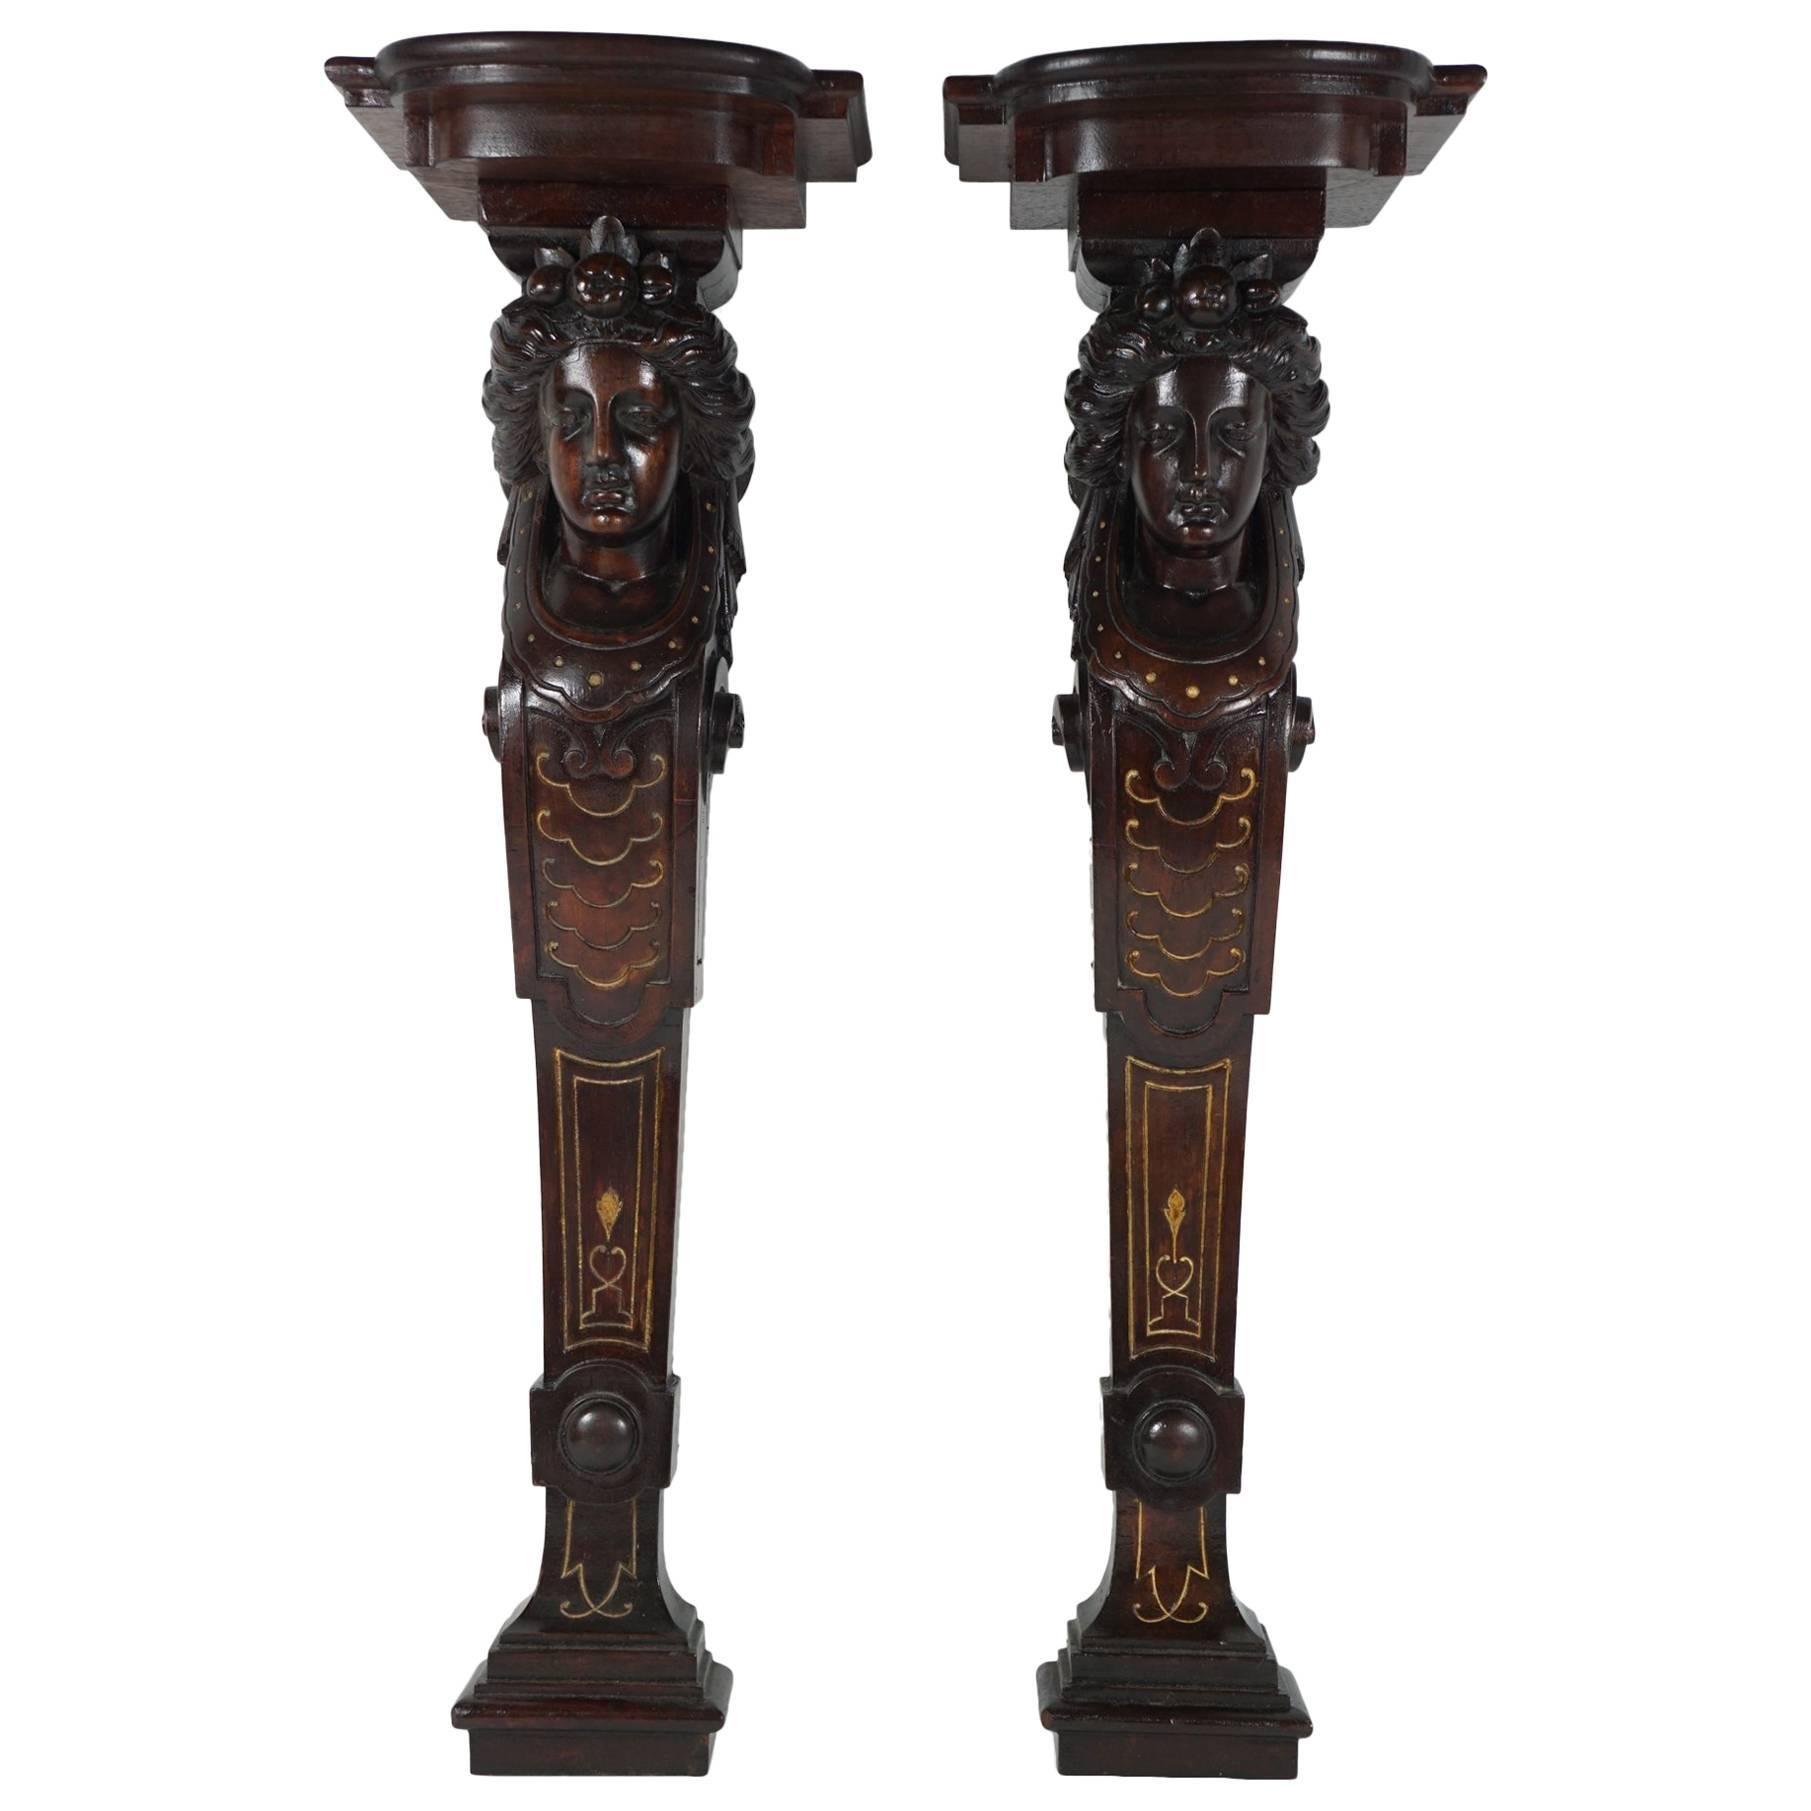 American Renaissance Revival Finely Carved and Gilt-Incised Walnut Wall Brackets